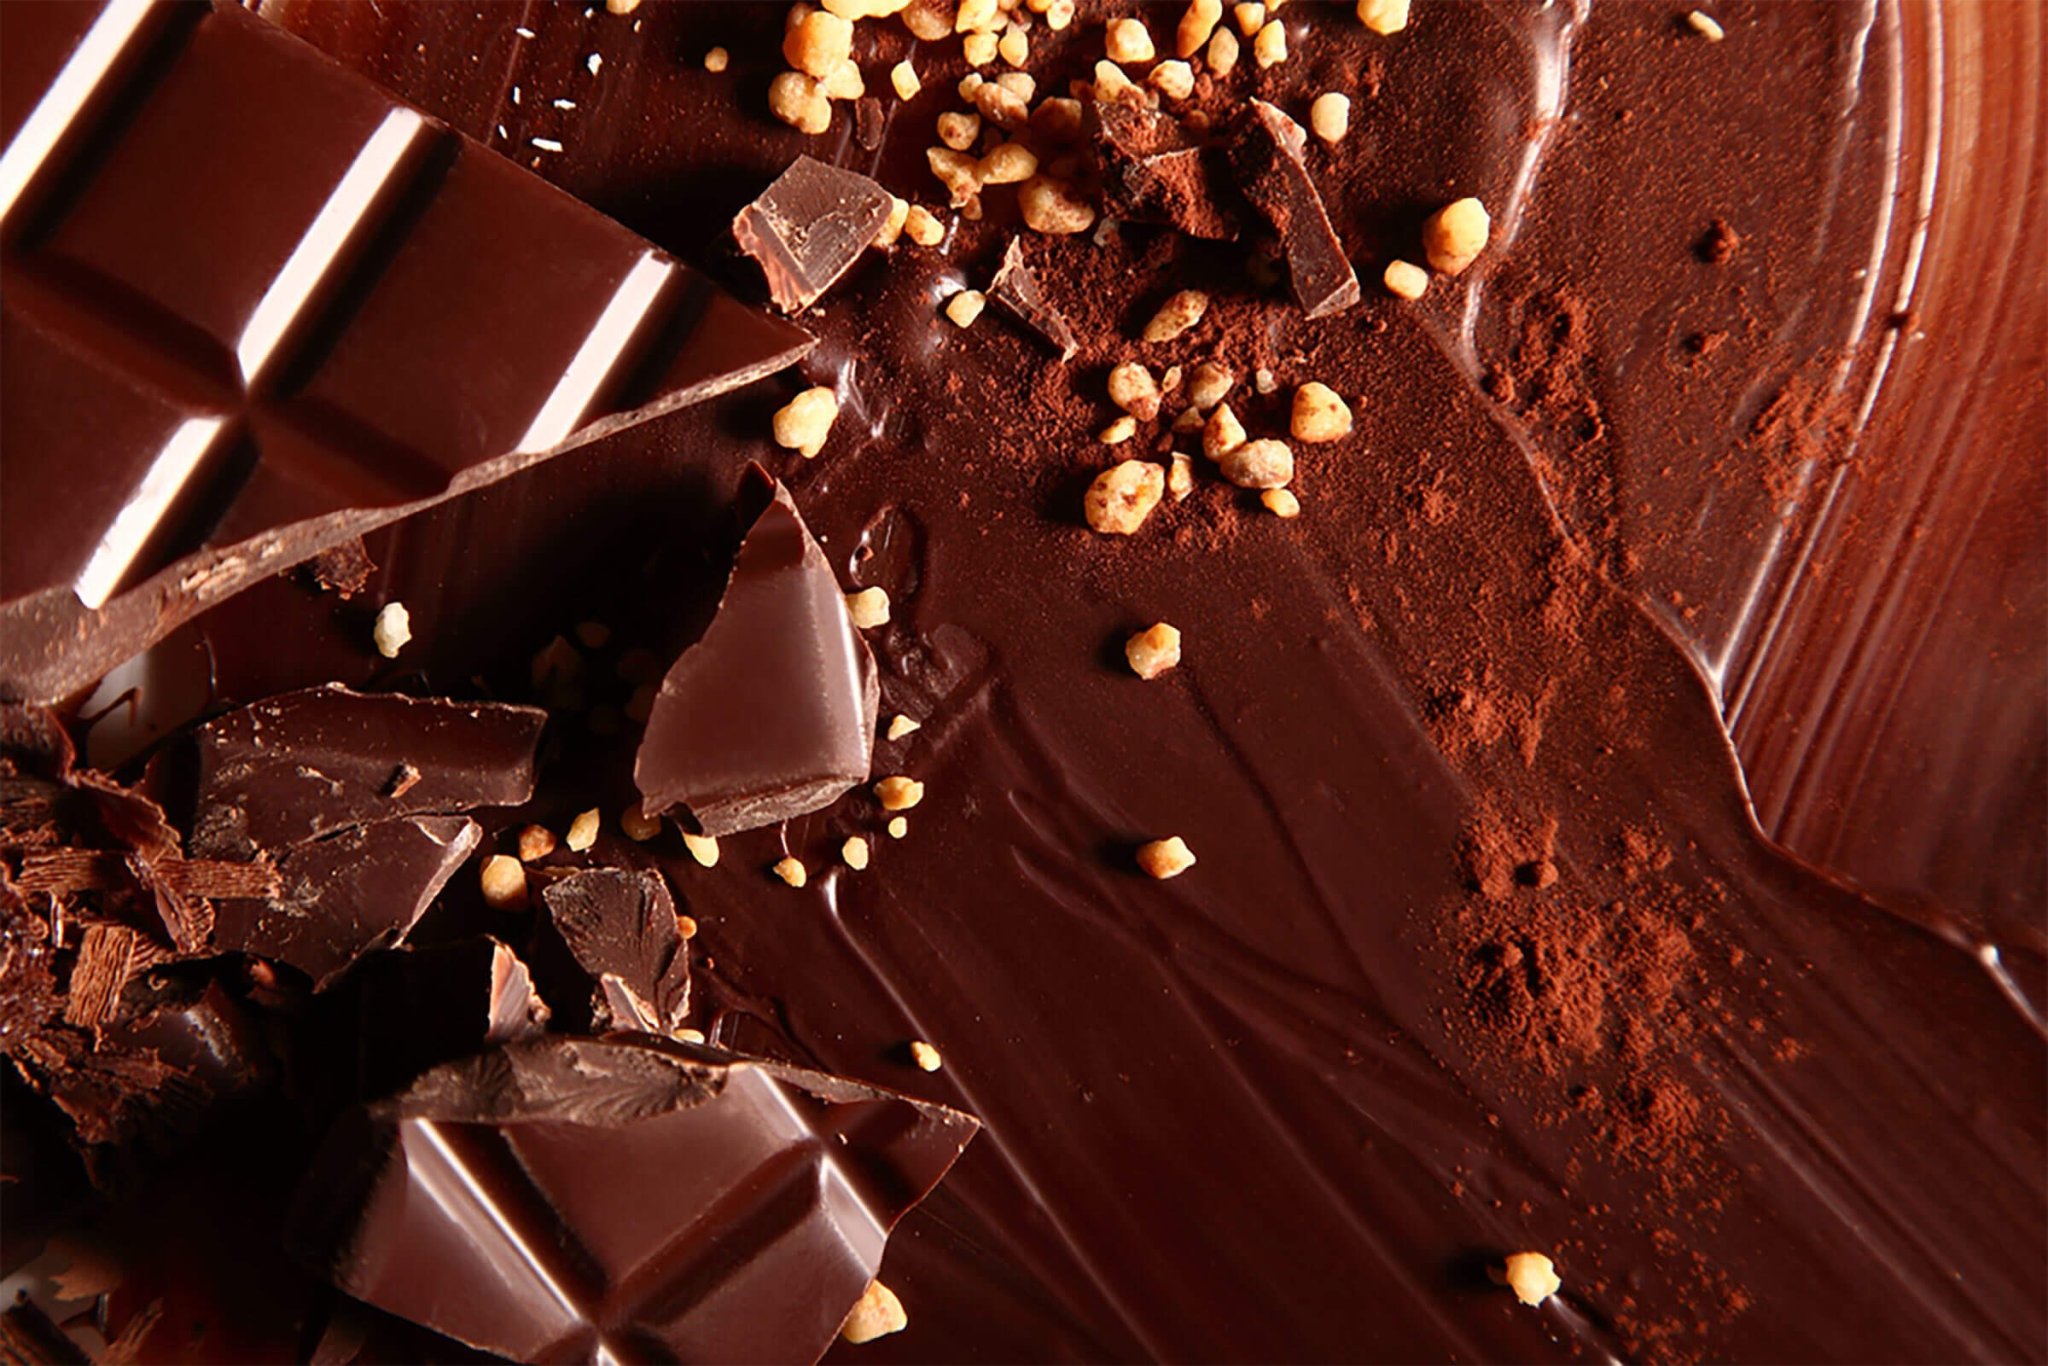 Here’s What You Need to Know About the Health Benefits of Chocolate